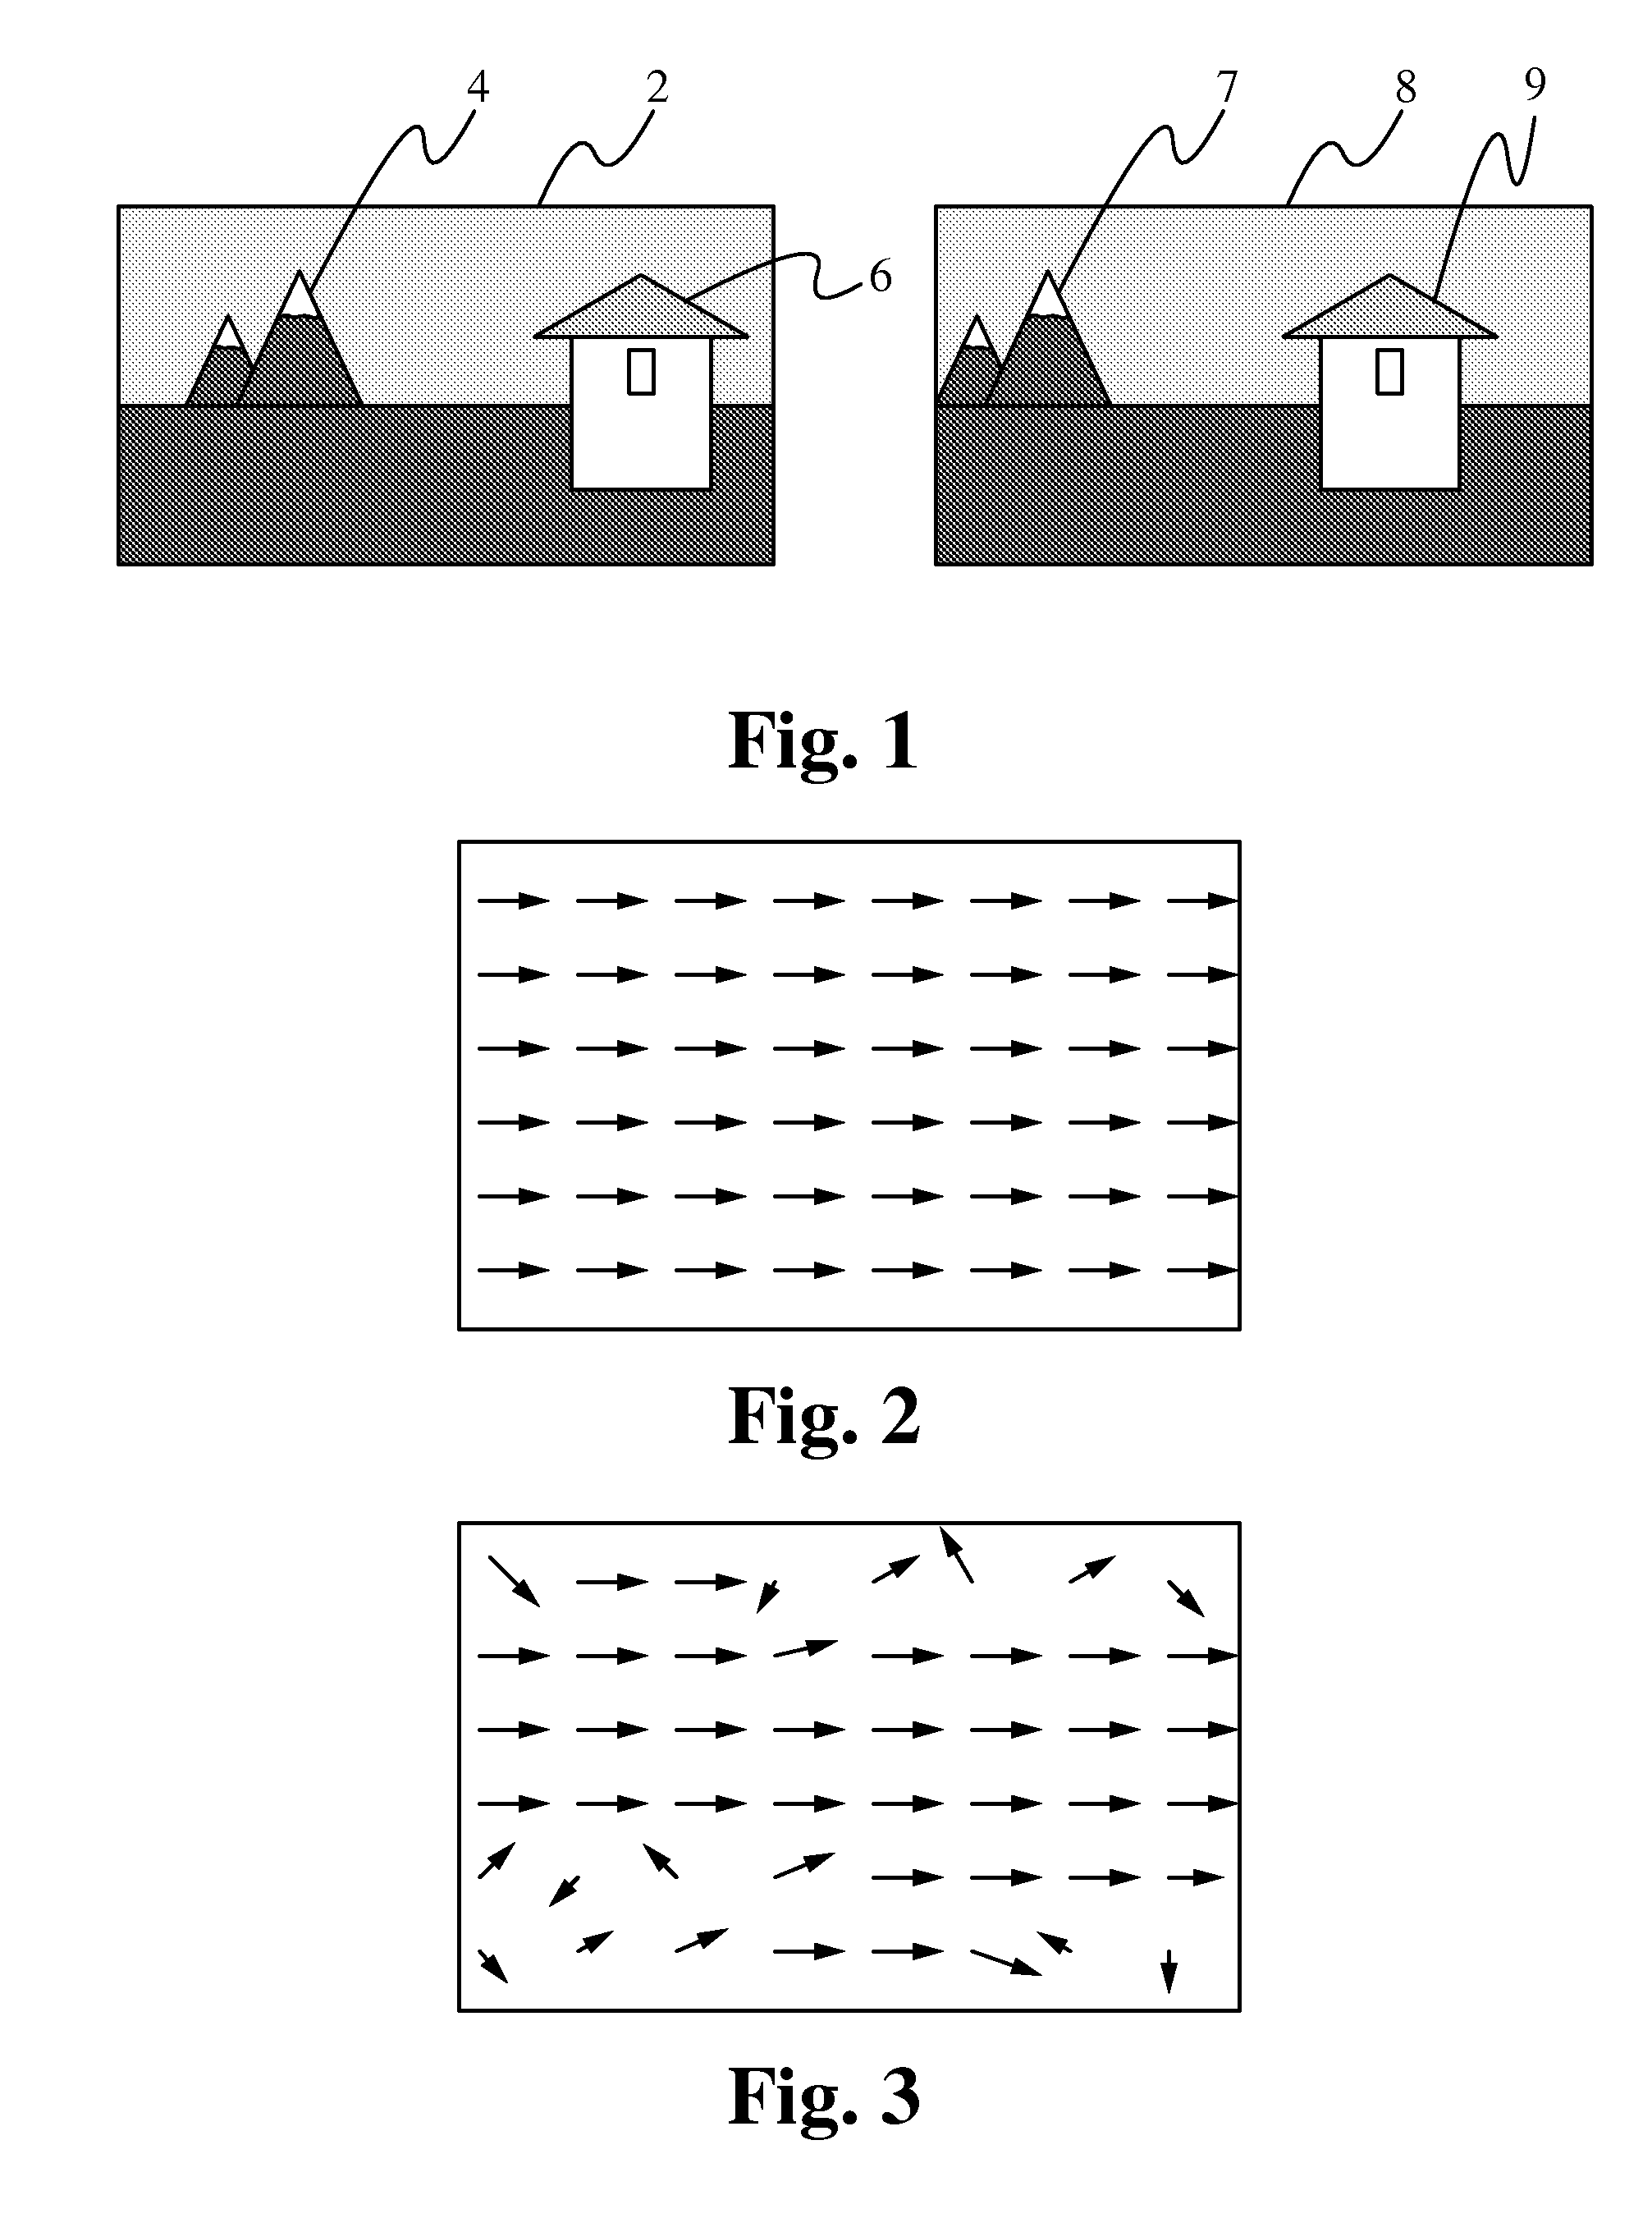 Method for highly accurate estimation of motion using phase correlation